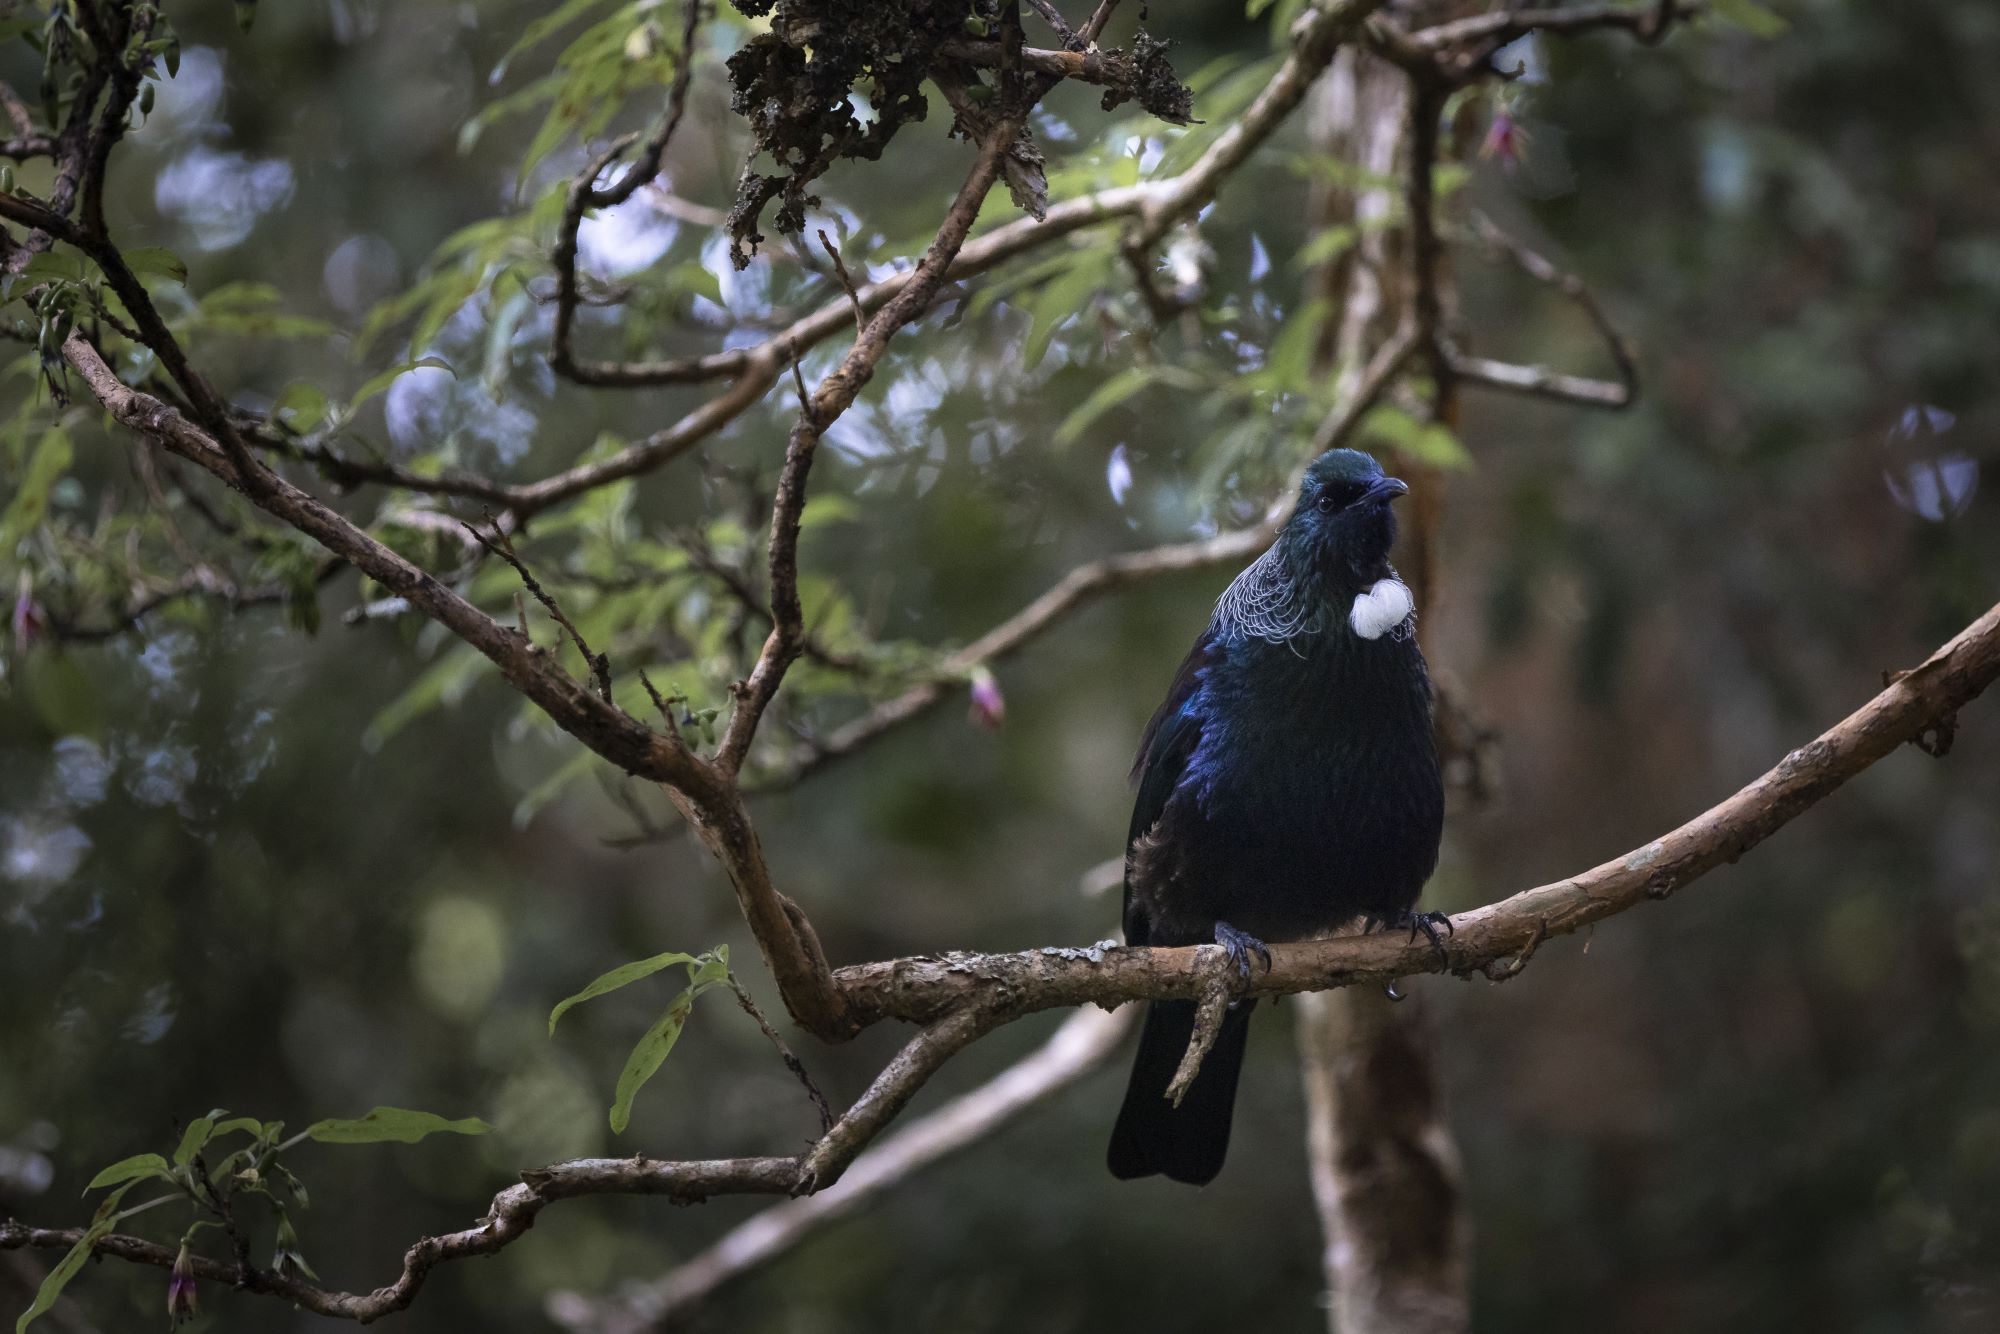 Tui sitting on a tree branch